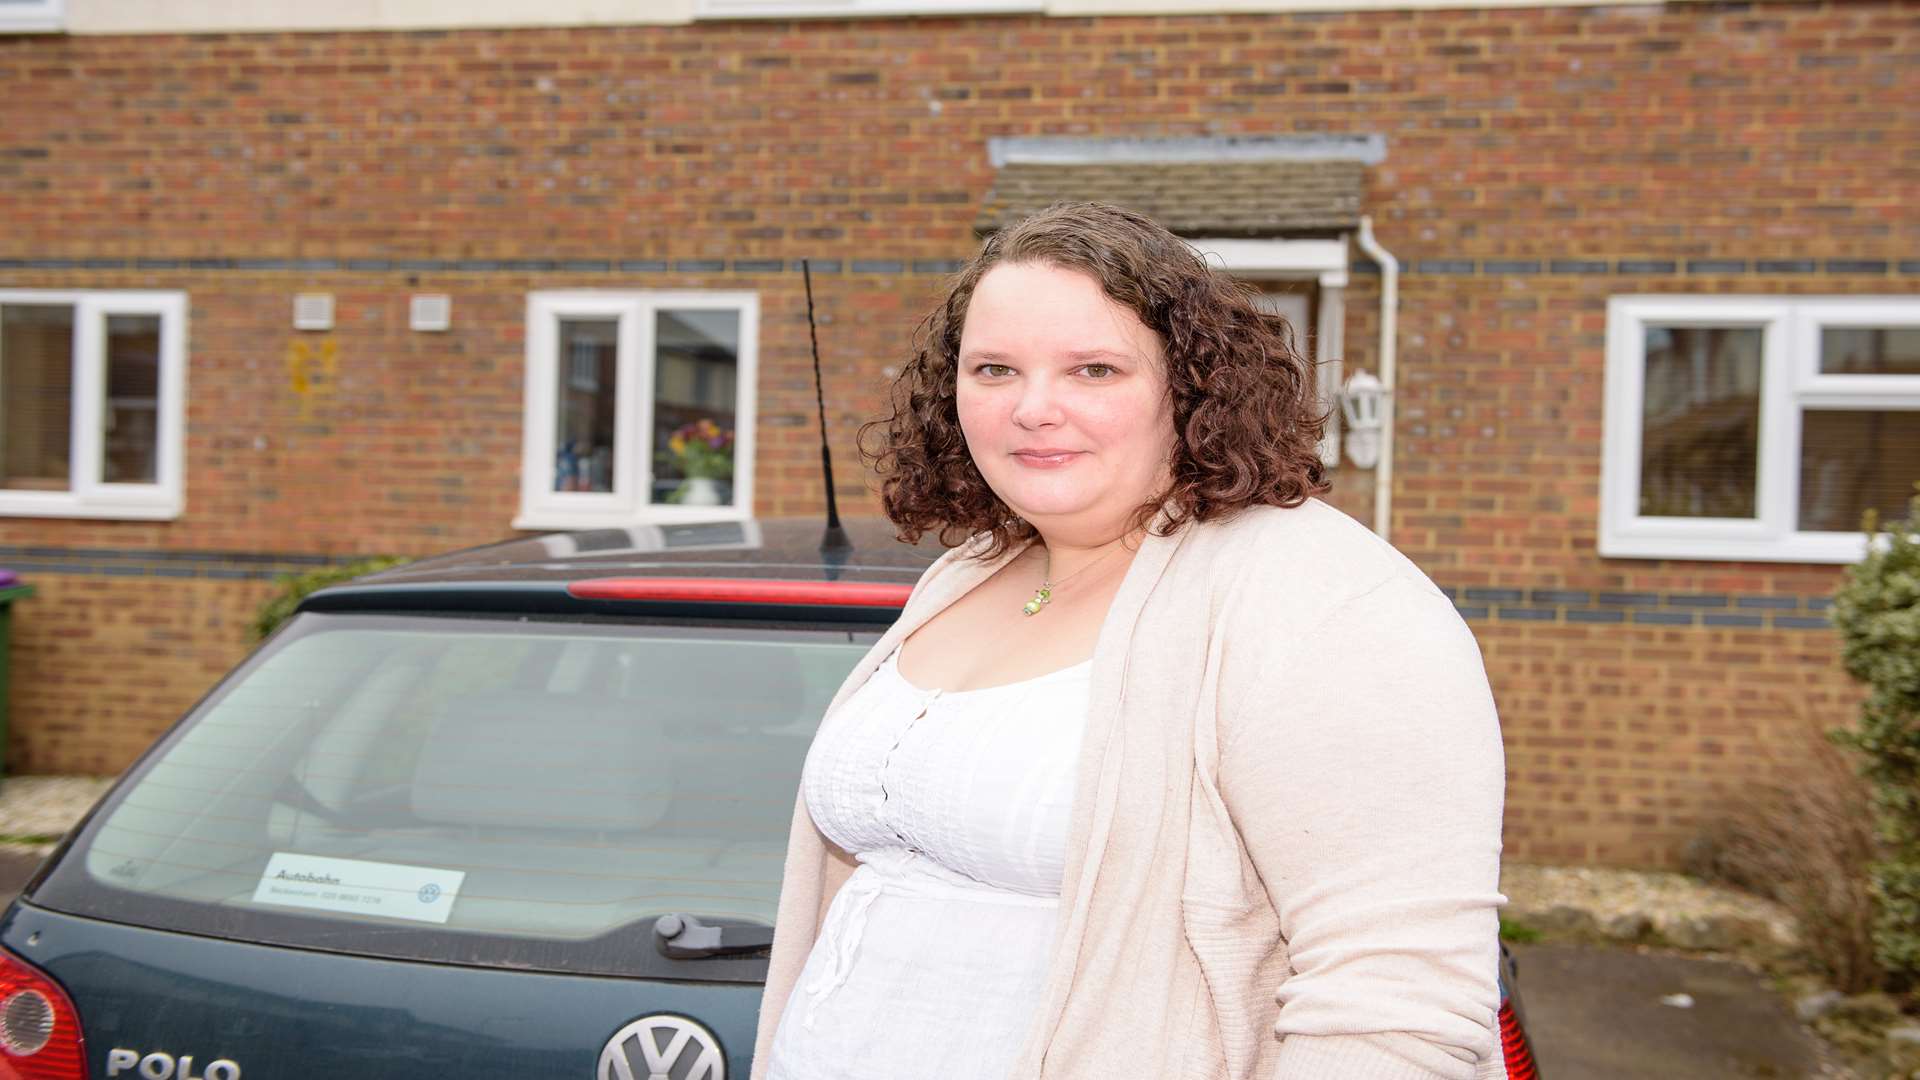 Kelly Golding is pleading for help finding her college work which was stolen from her car. Picture: Alan Langley